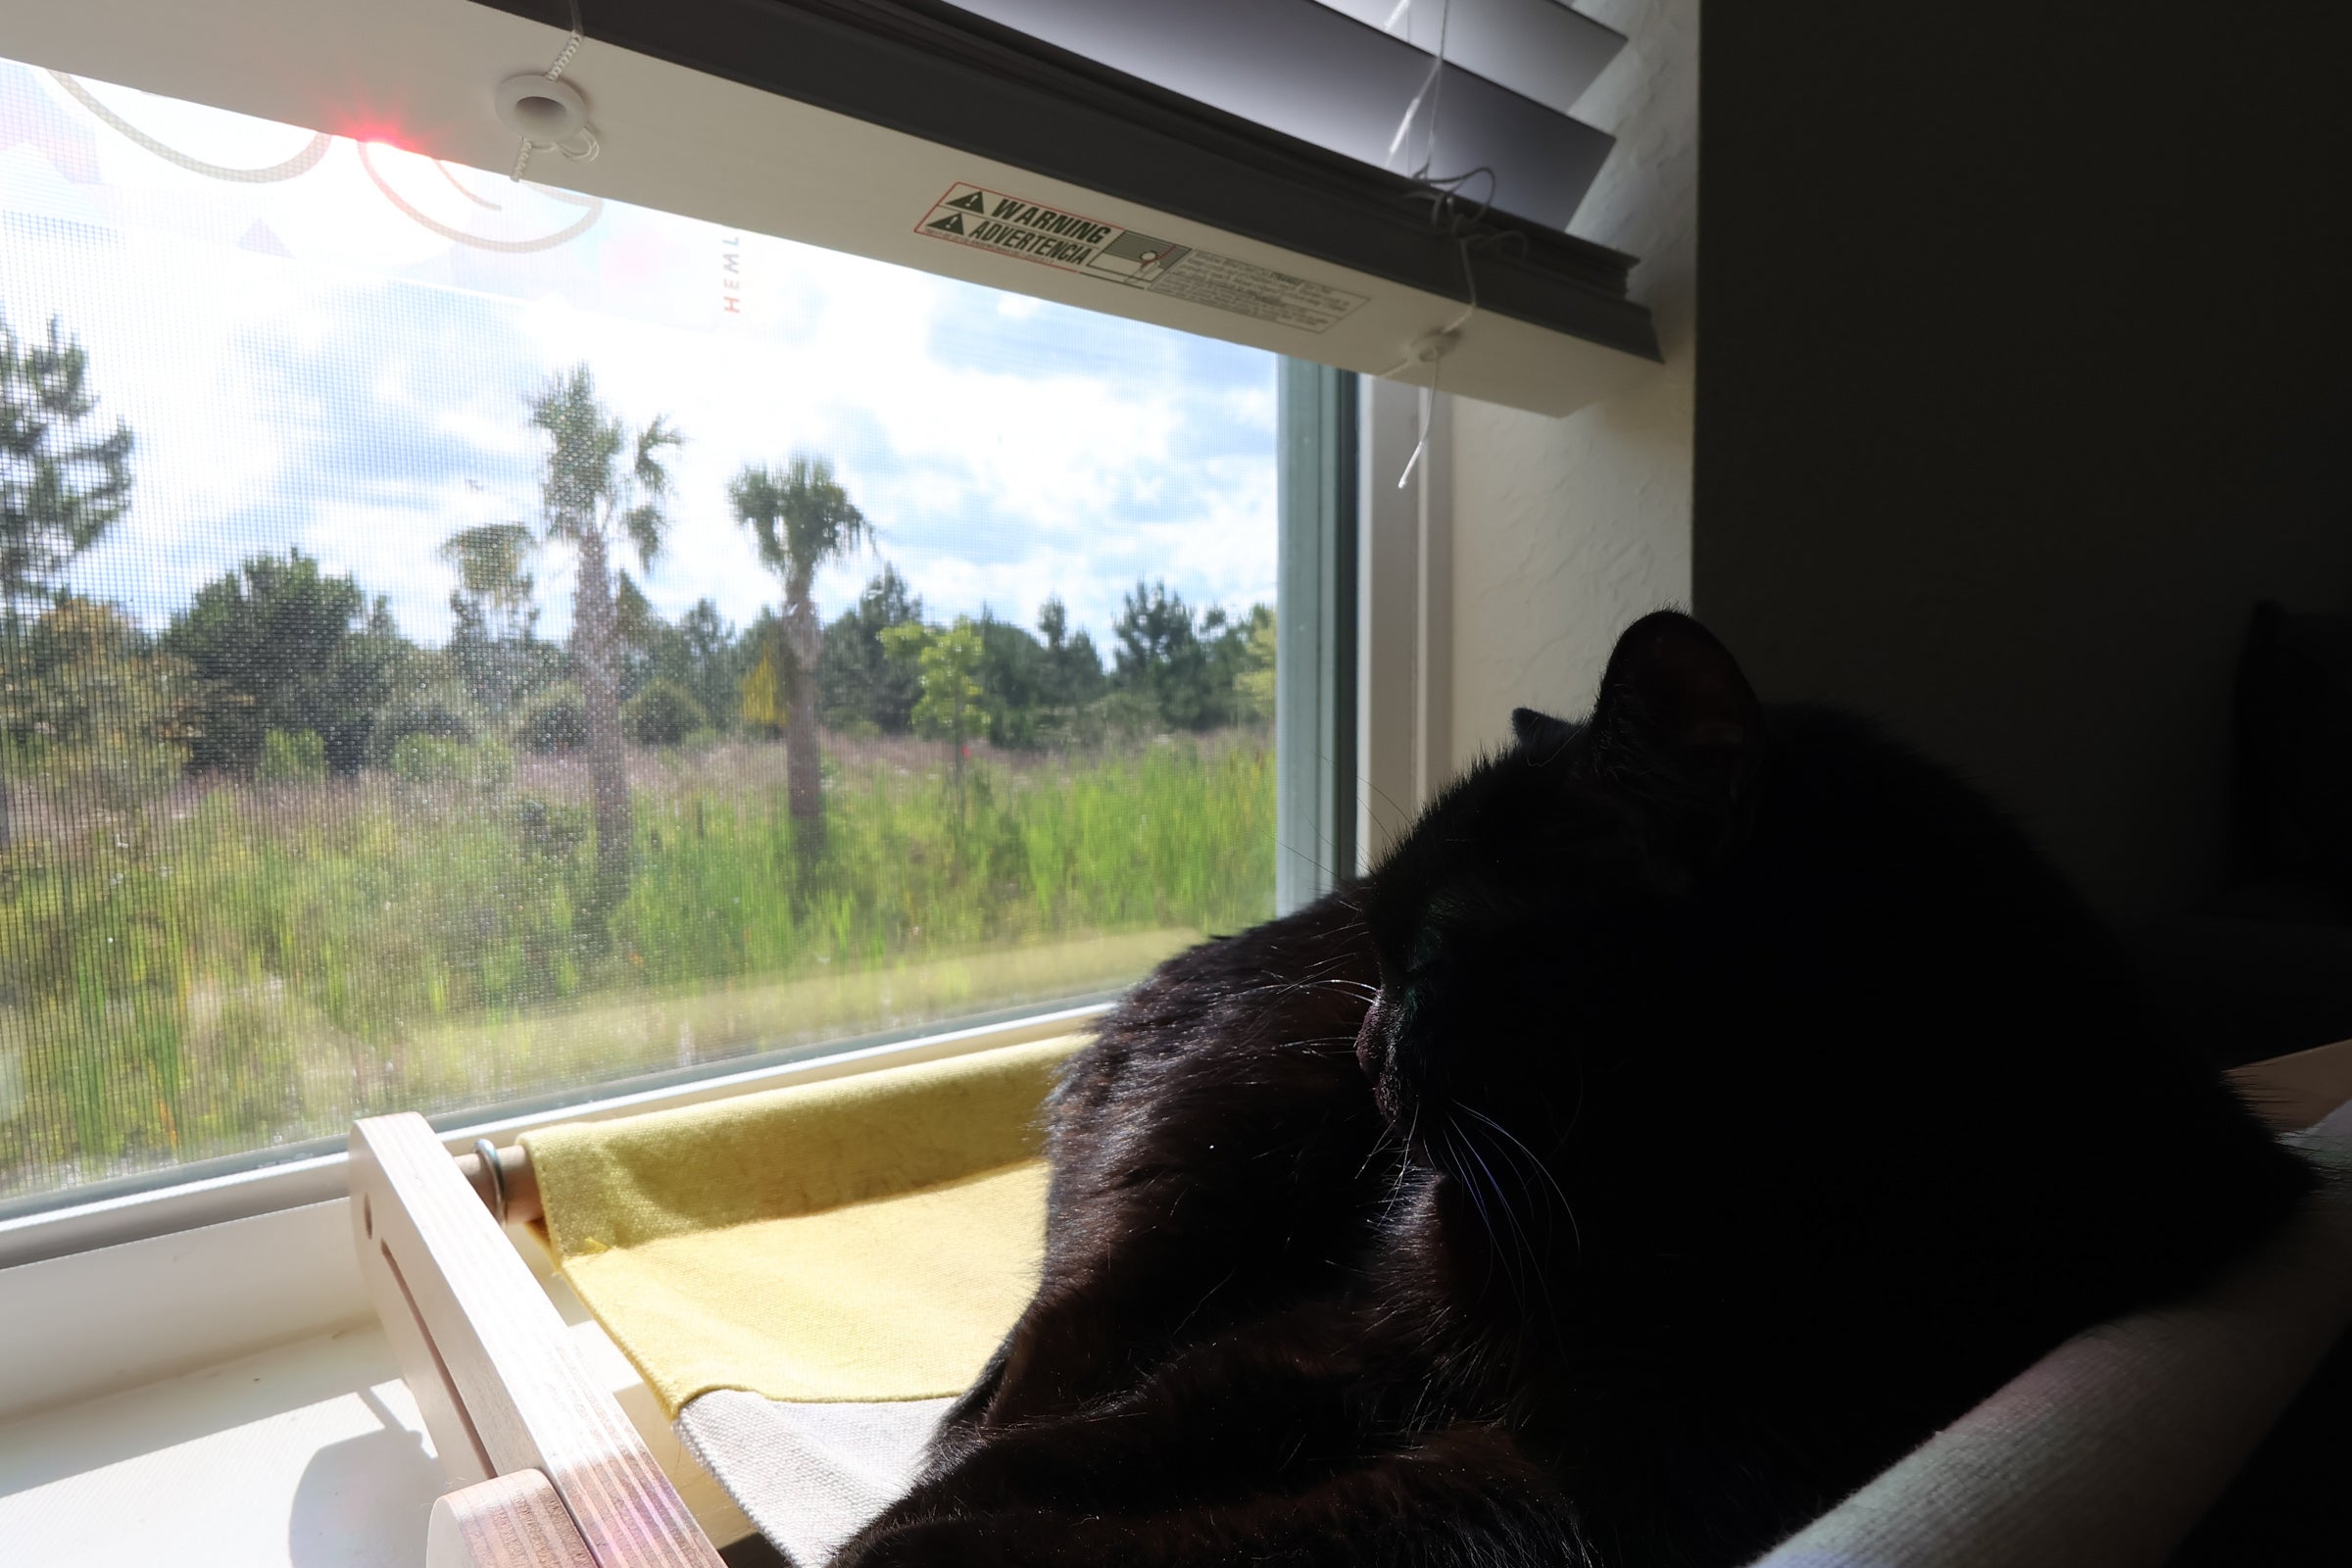 A photo of a black cat sitting on a window seat